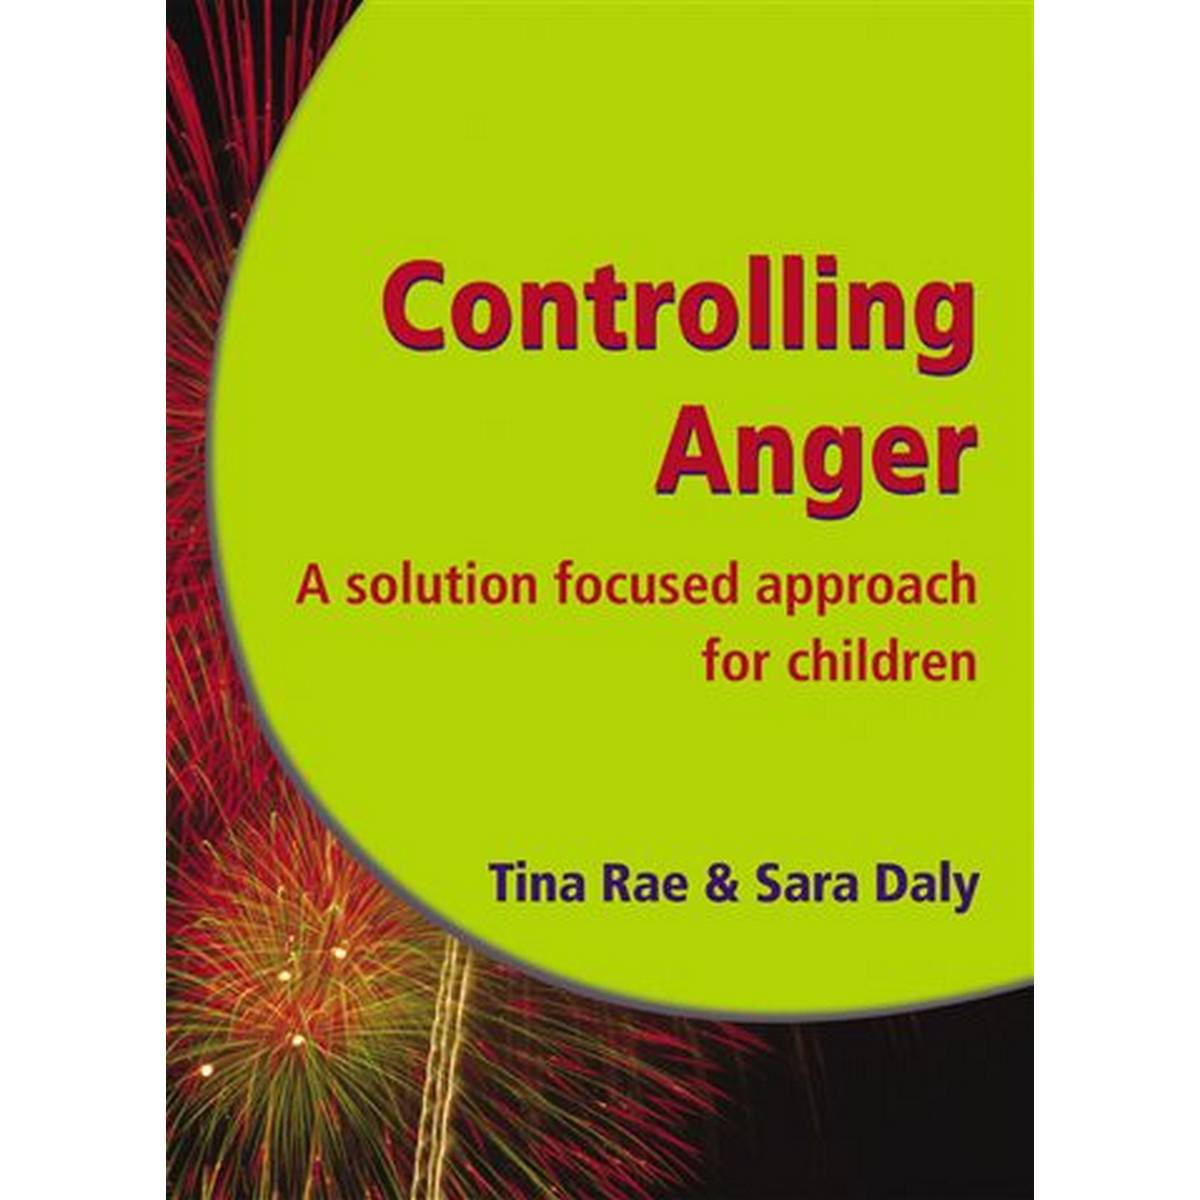 Controlling Anger: A Solution Focused Approach for Children